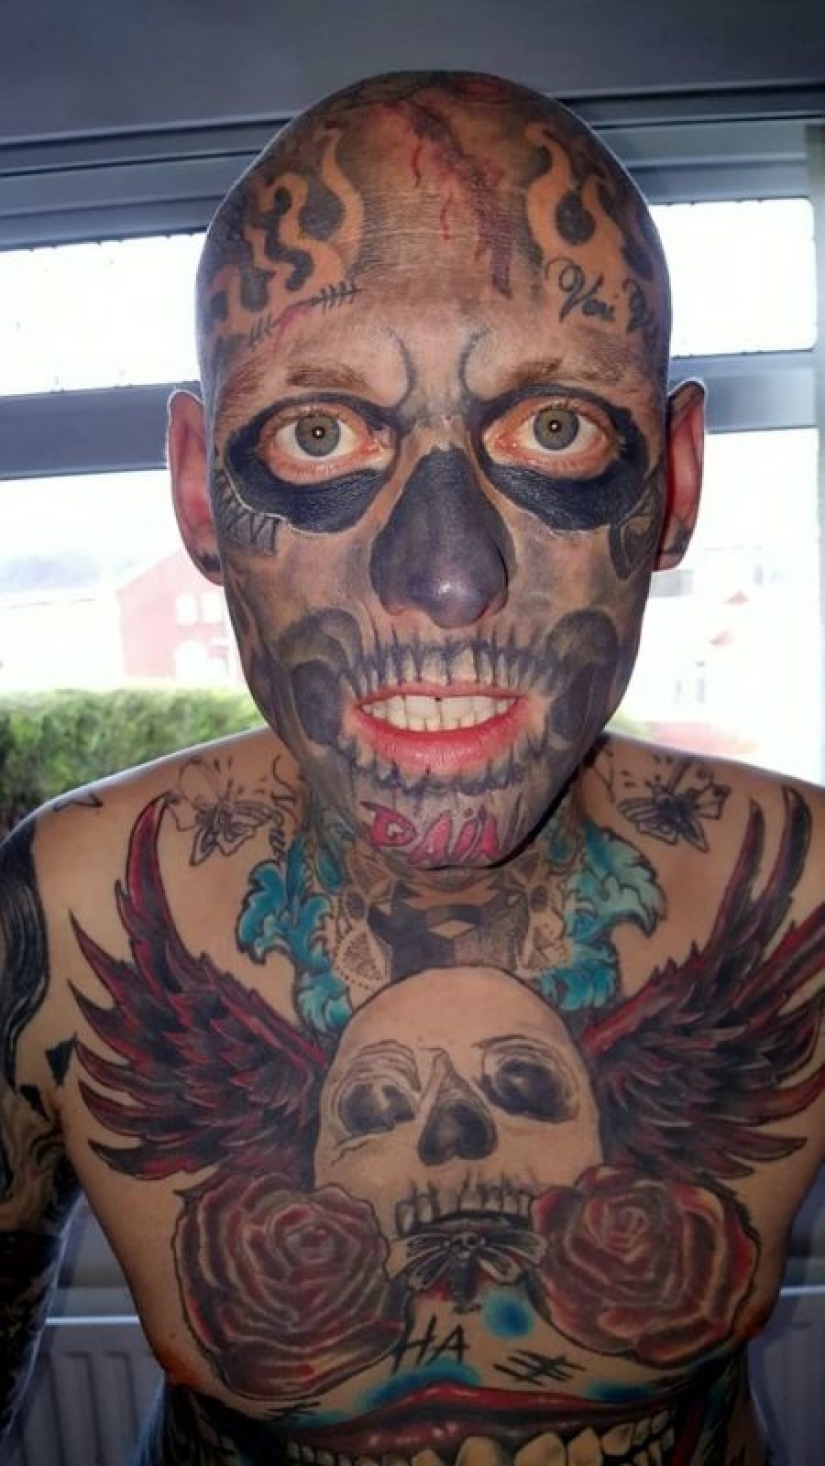 "Kids, don't be scared, this is your dad": an Irishman spent 36 thousand dollars on tattoos and turned into a kind of skeleton